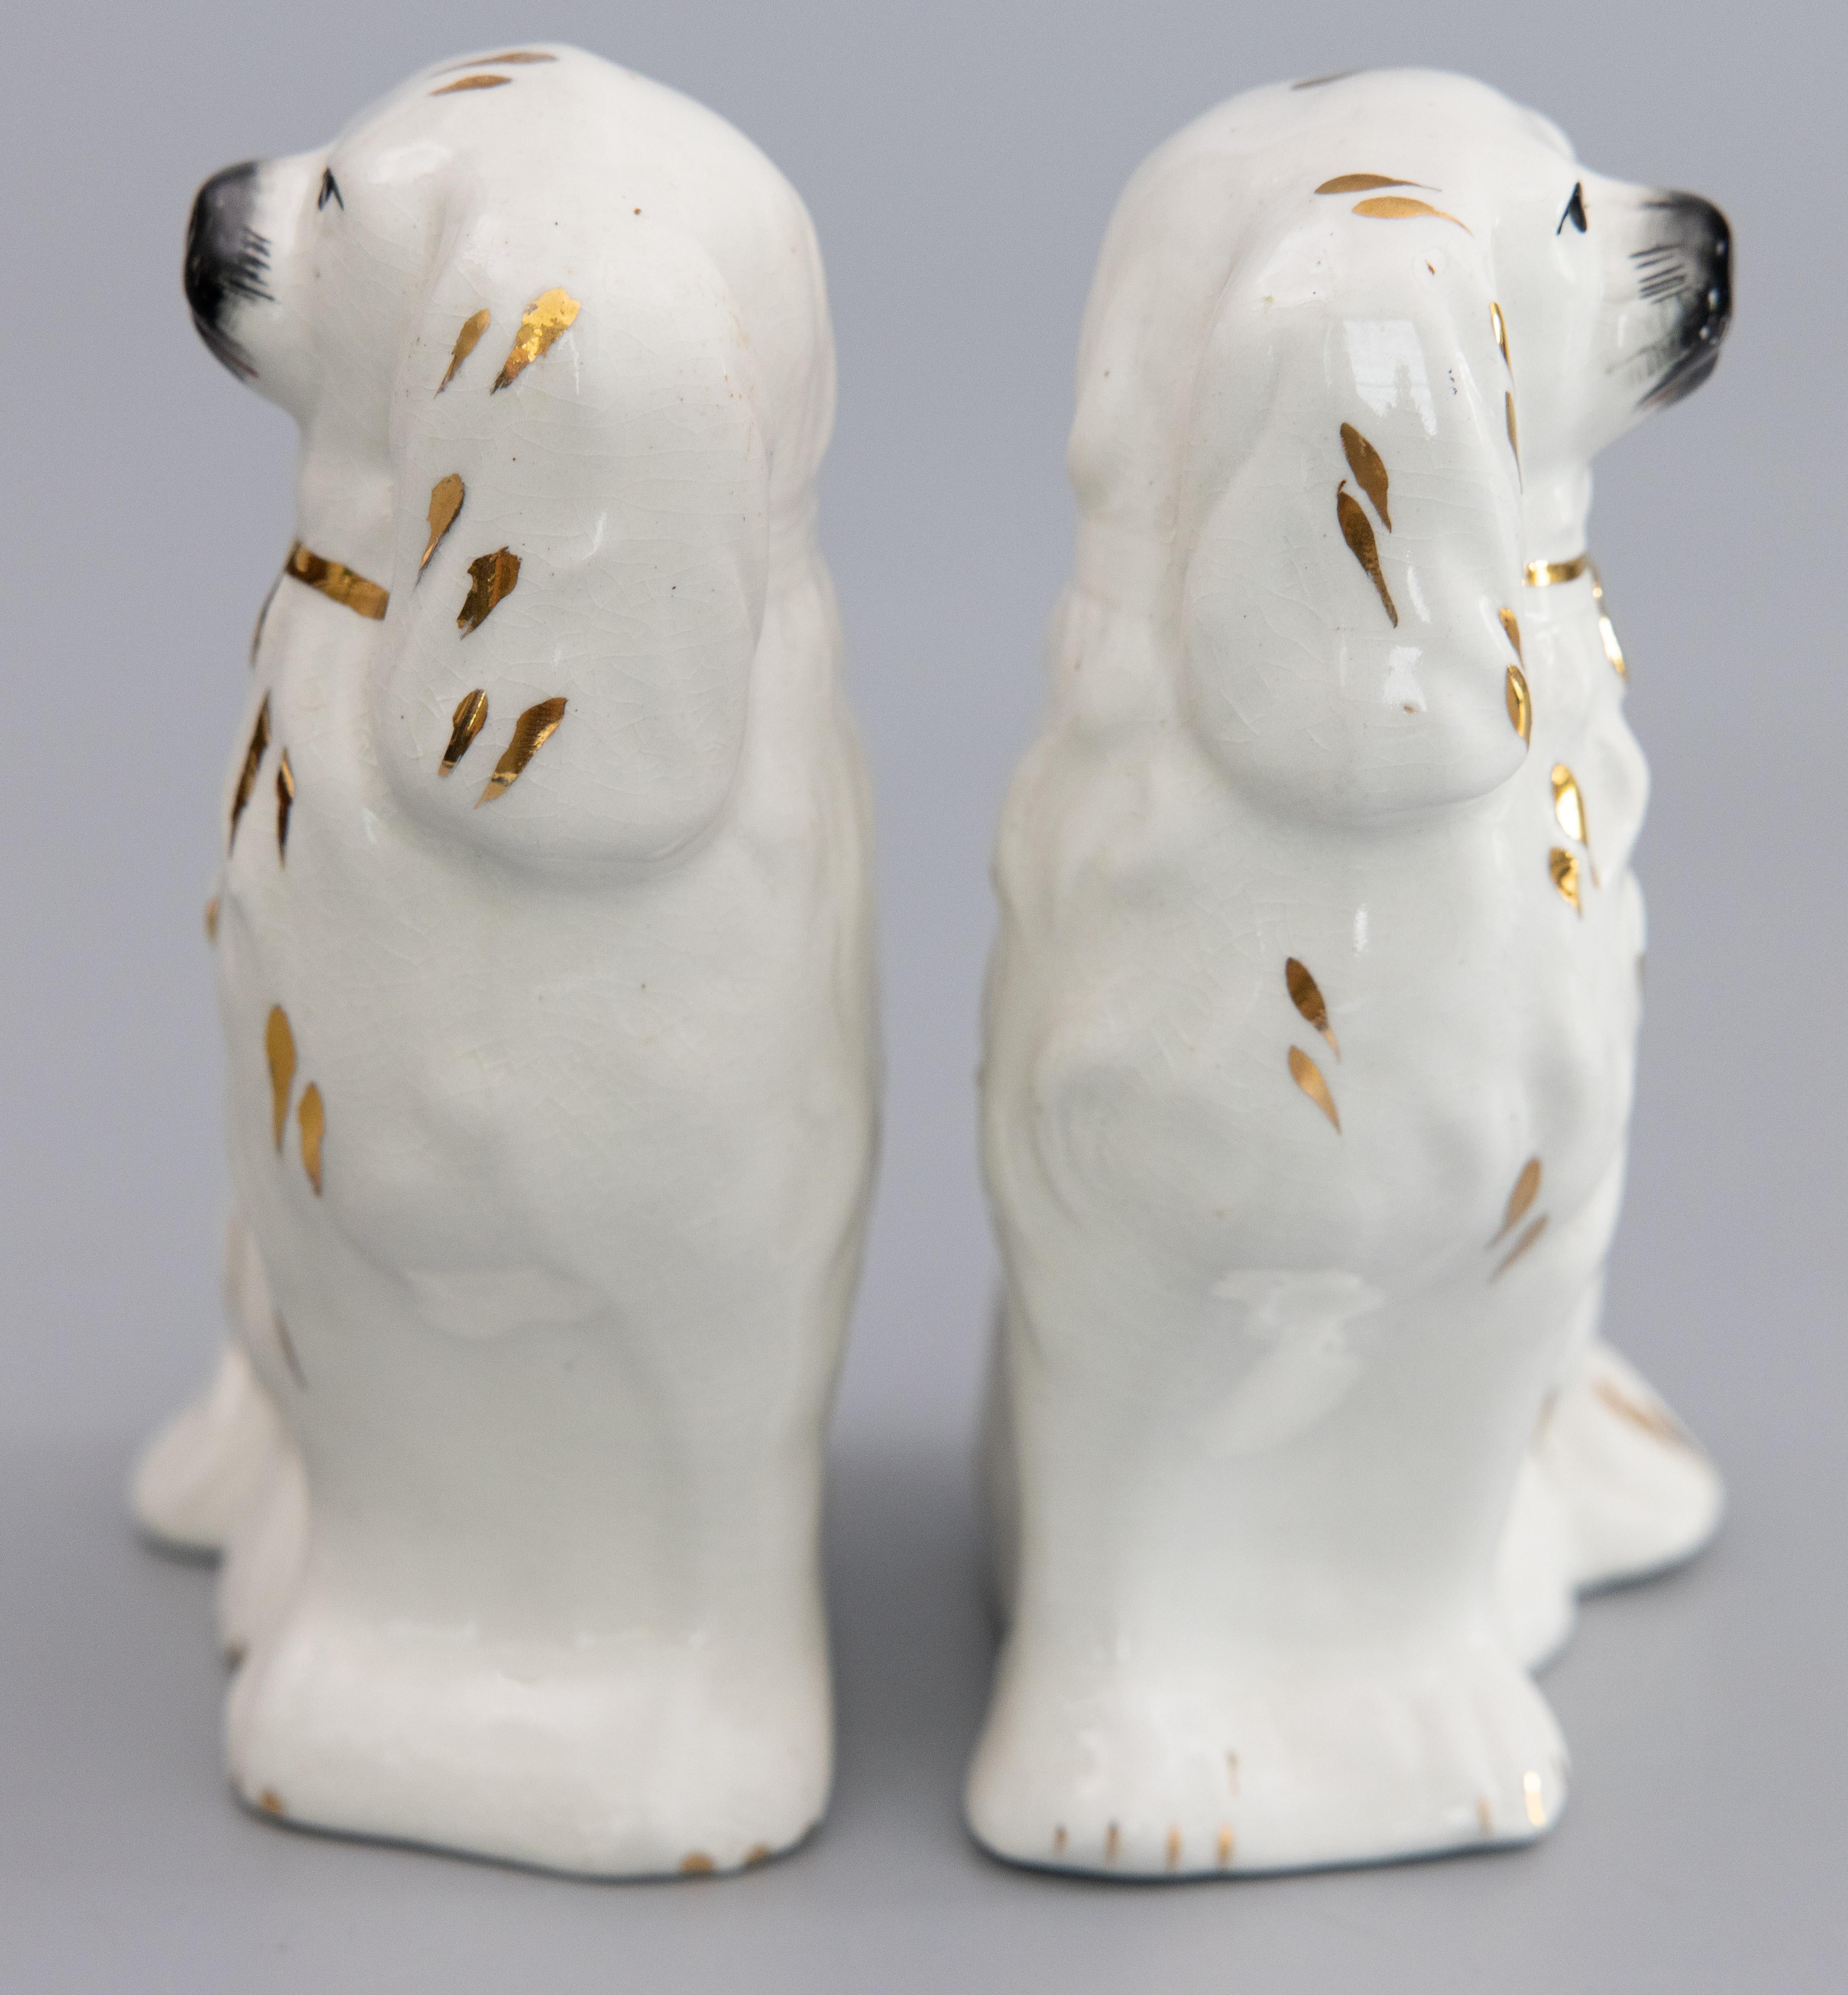 Pair of Early 20th Century English Staffordshire Spaniel Dogs Figurines In Good Condition For Sale In Pearland, TX